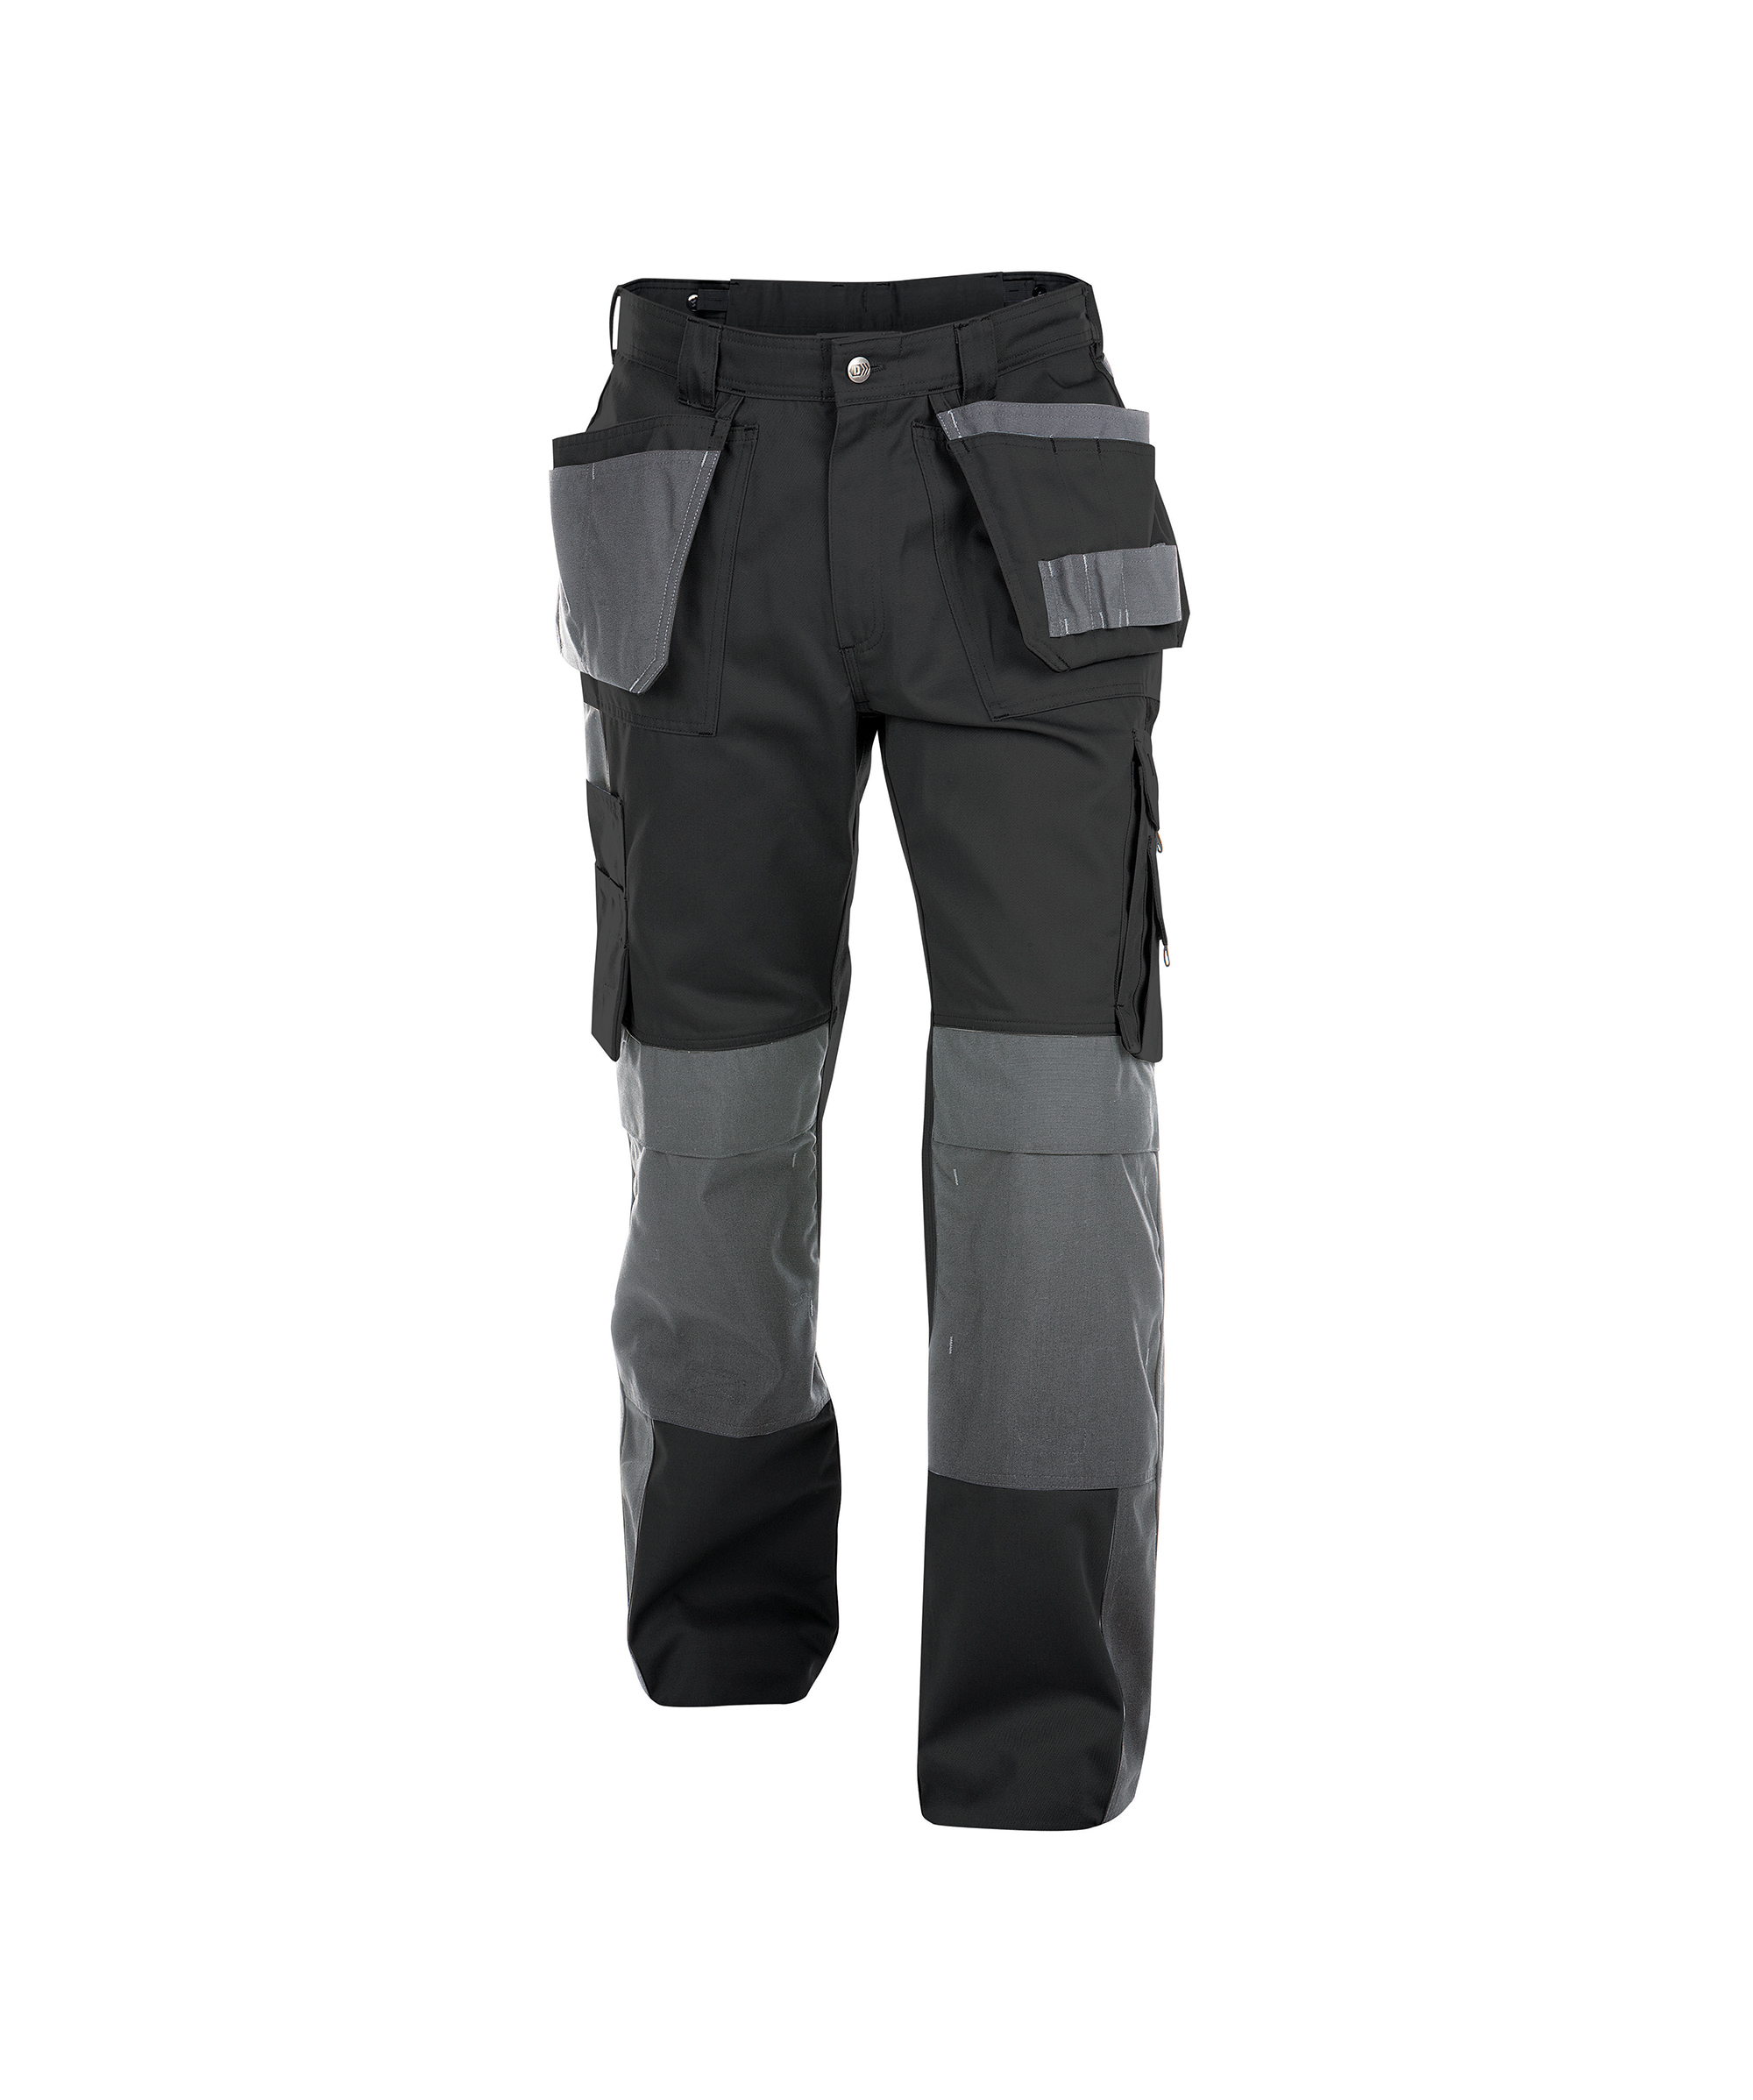 seattle_two-tone-work-trousers-with-multi-pockets-and-knee-pockets_black-cement-grey_front.jpg